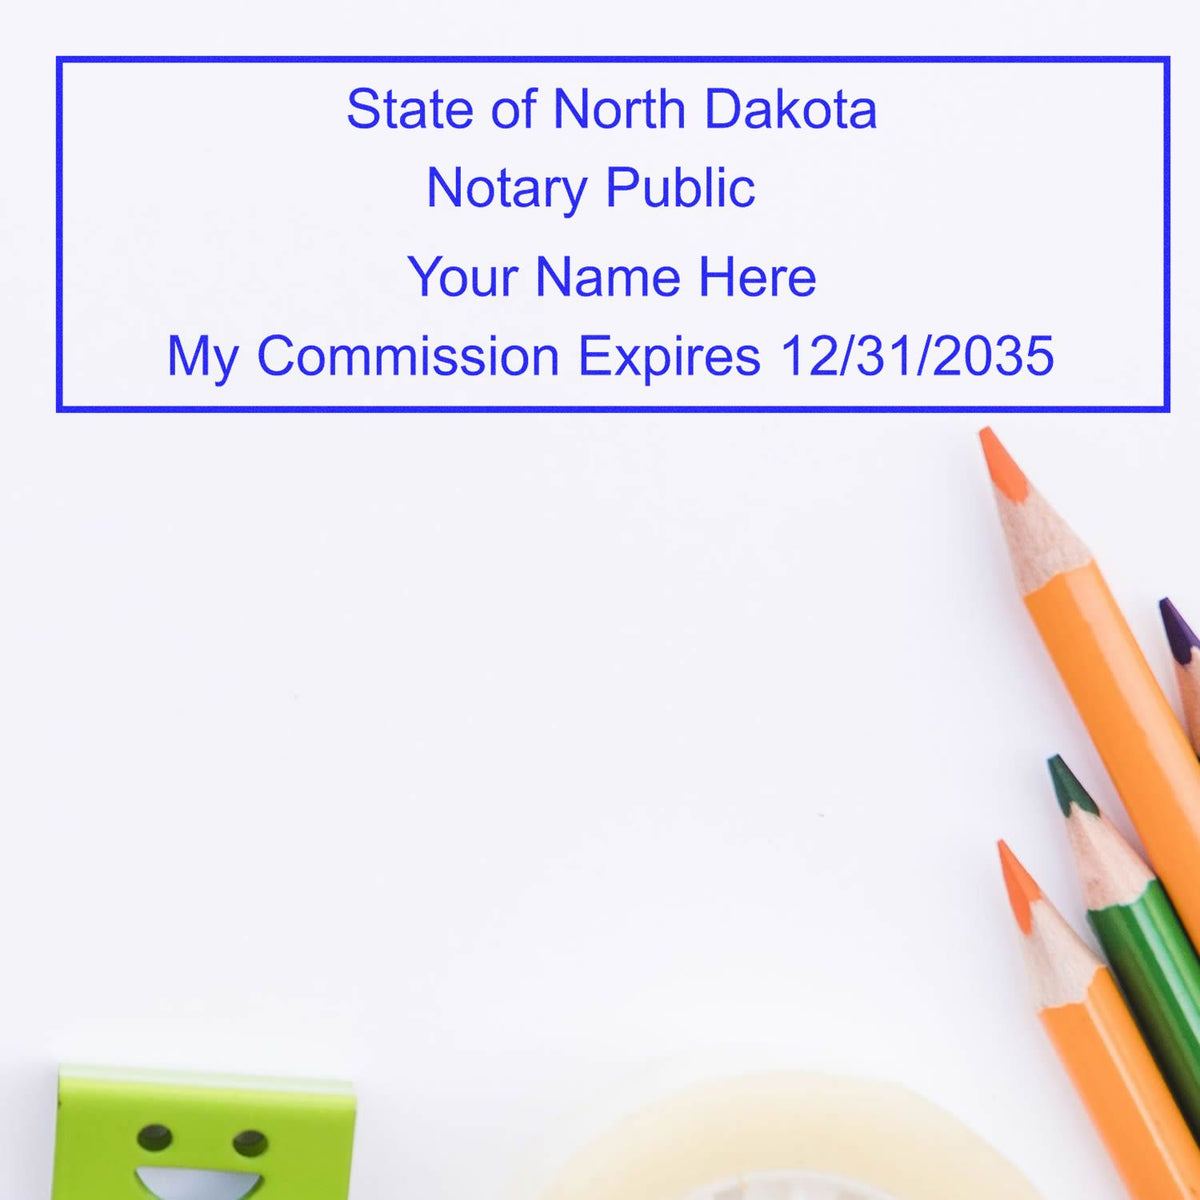 A photograph of the Heavy-Duty North Dakota Rectangular Notary Stamp stamp impression reveals a vivid, professional image of the on paper.